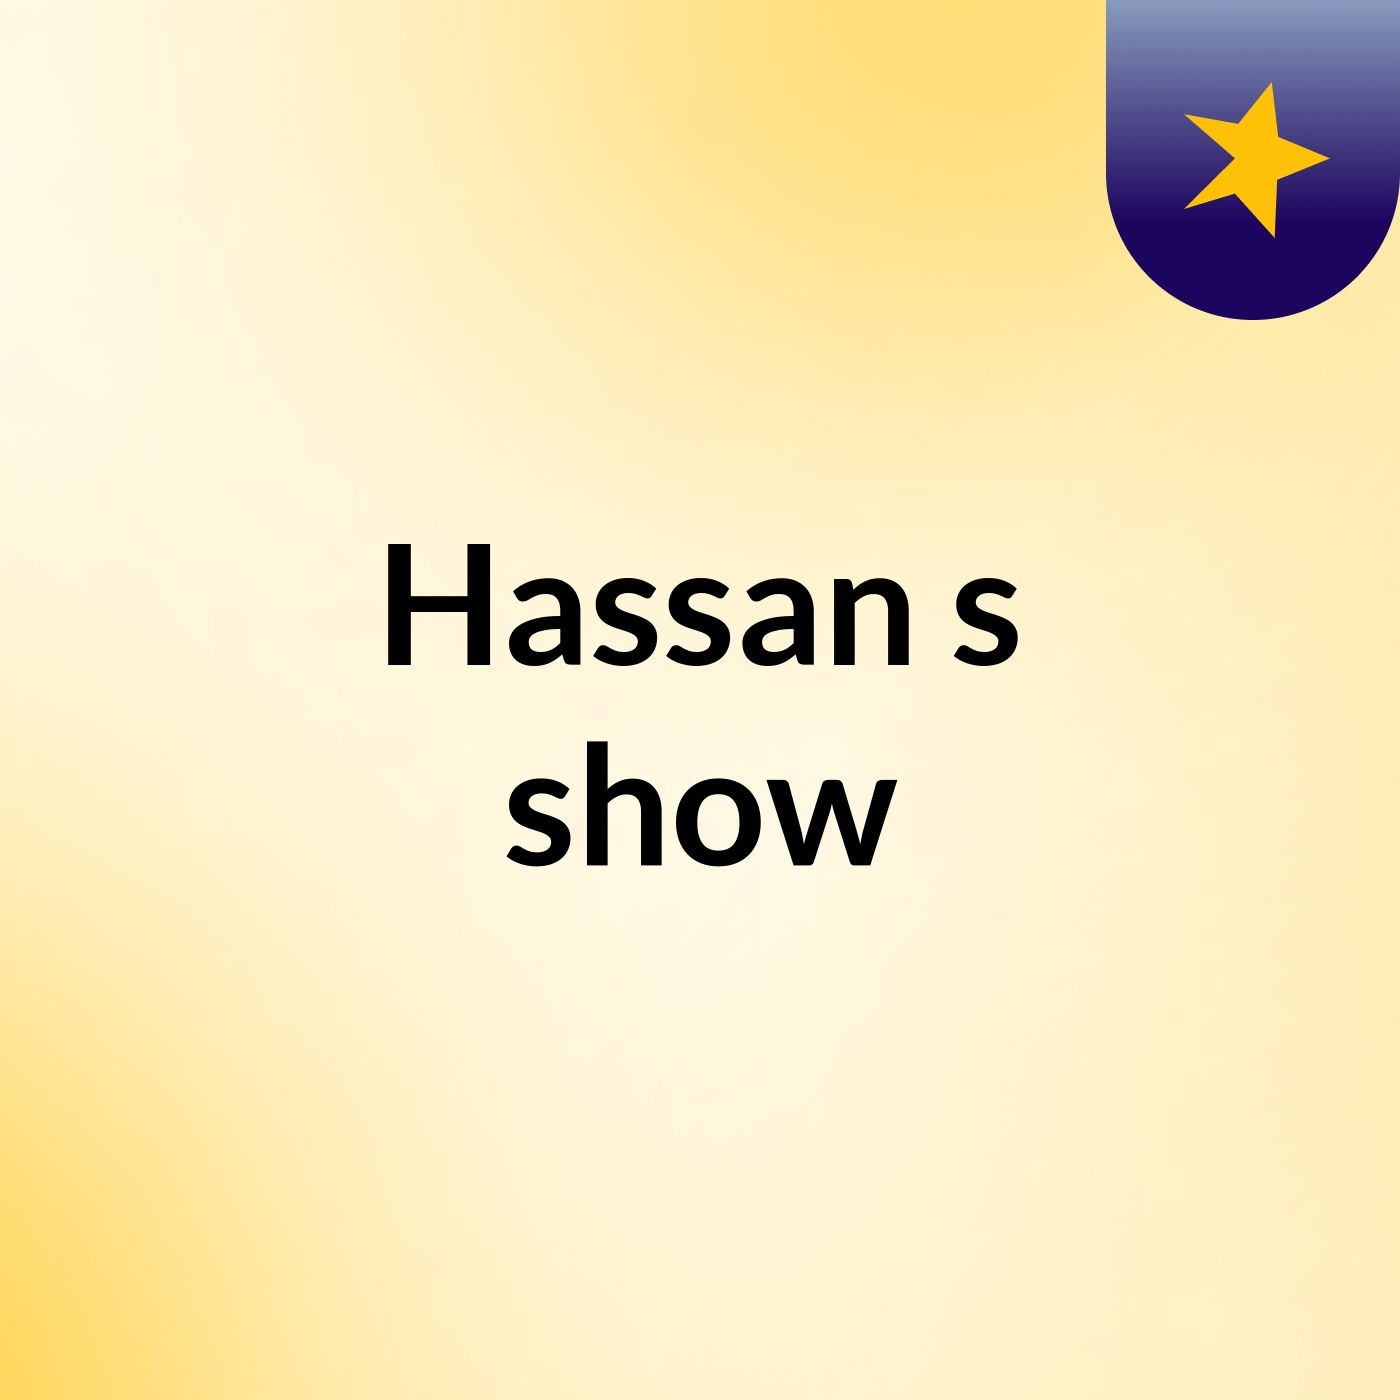 Hassan's show